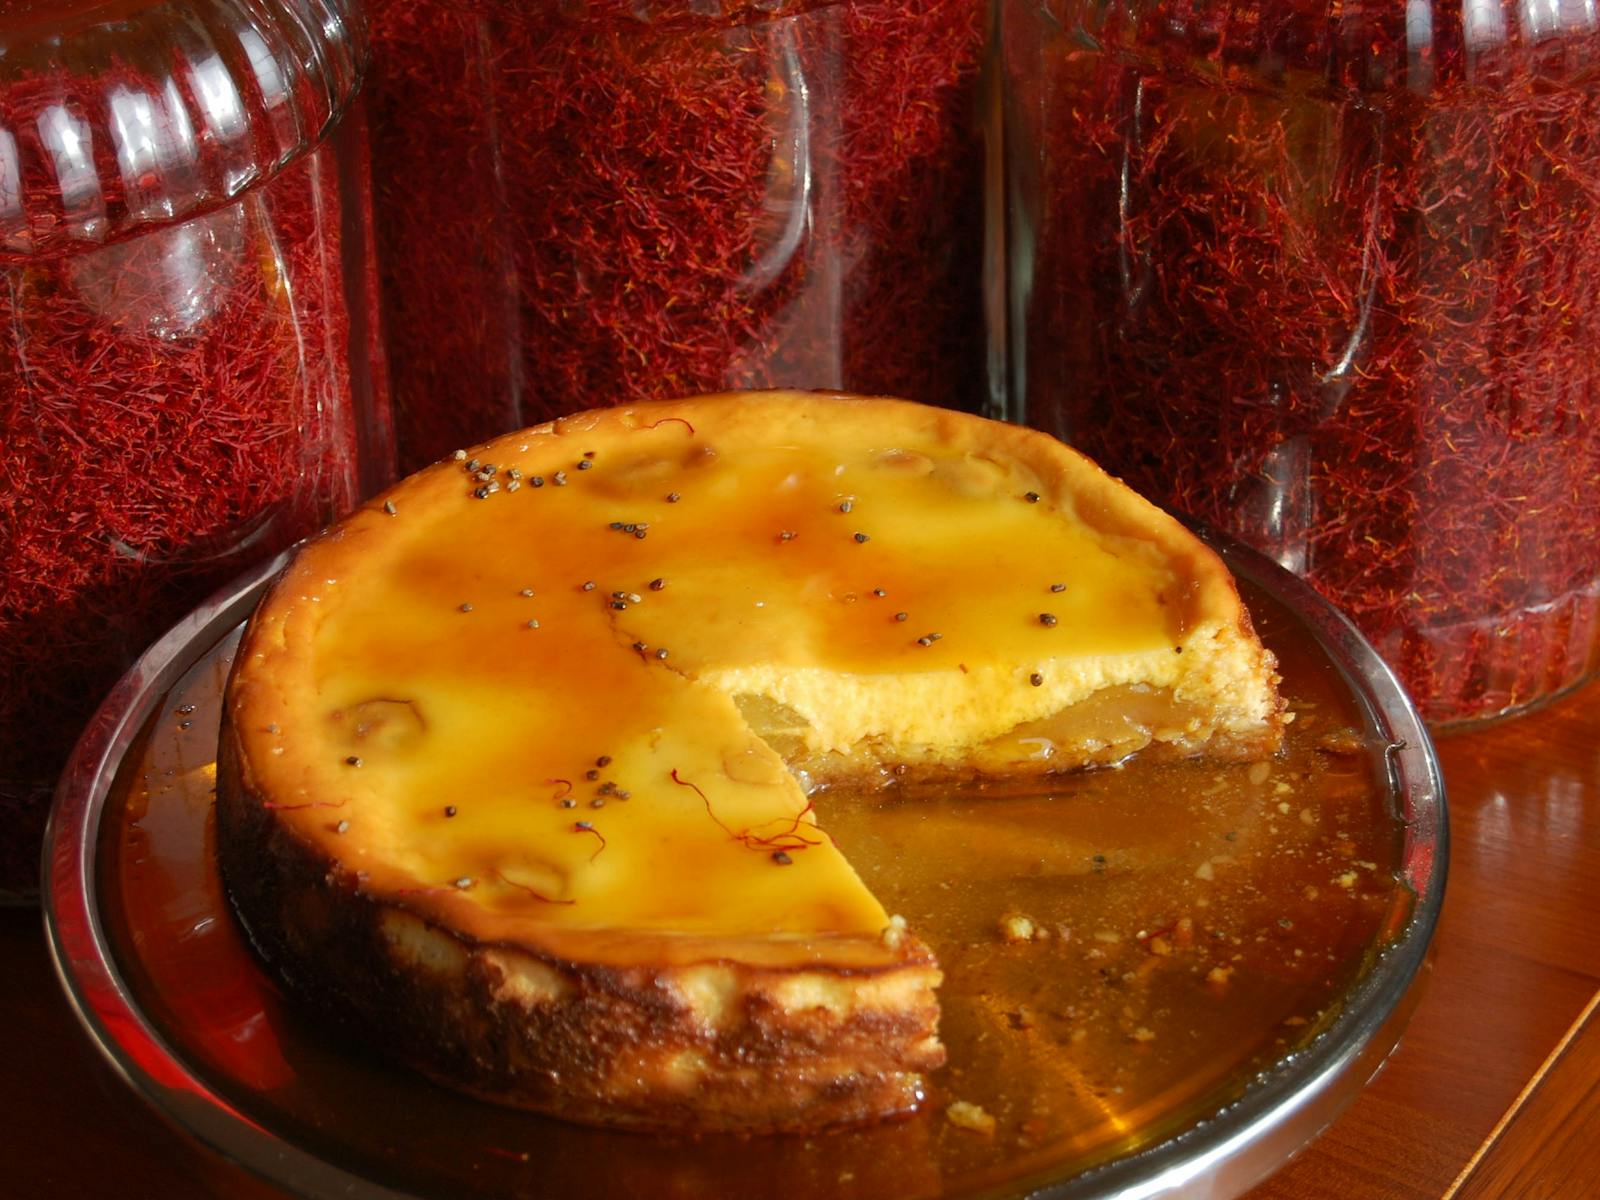 Saffron poached pear cheesecake drizzled with a saffron syrup and large jars of saffron